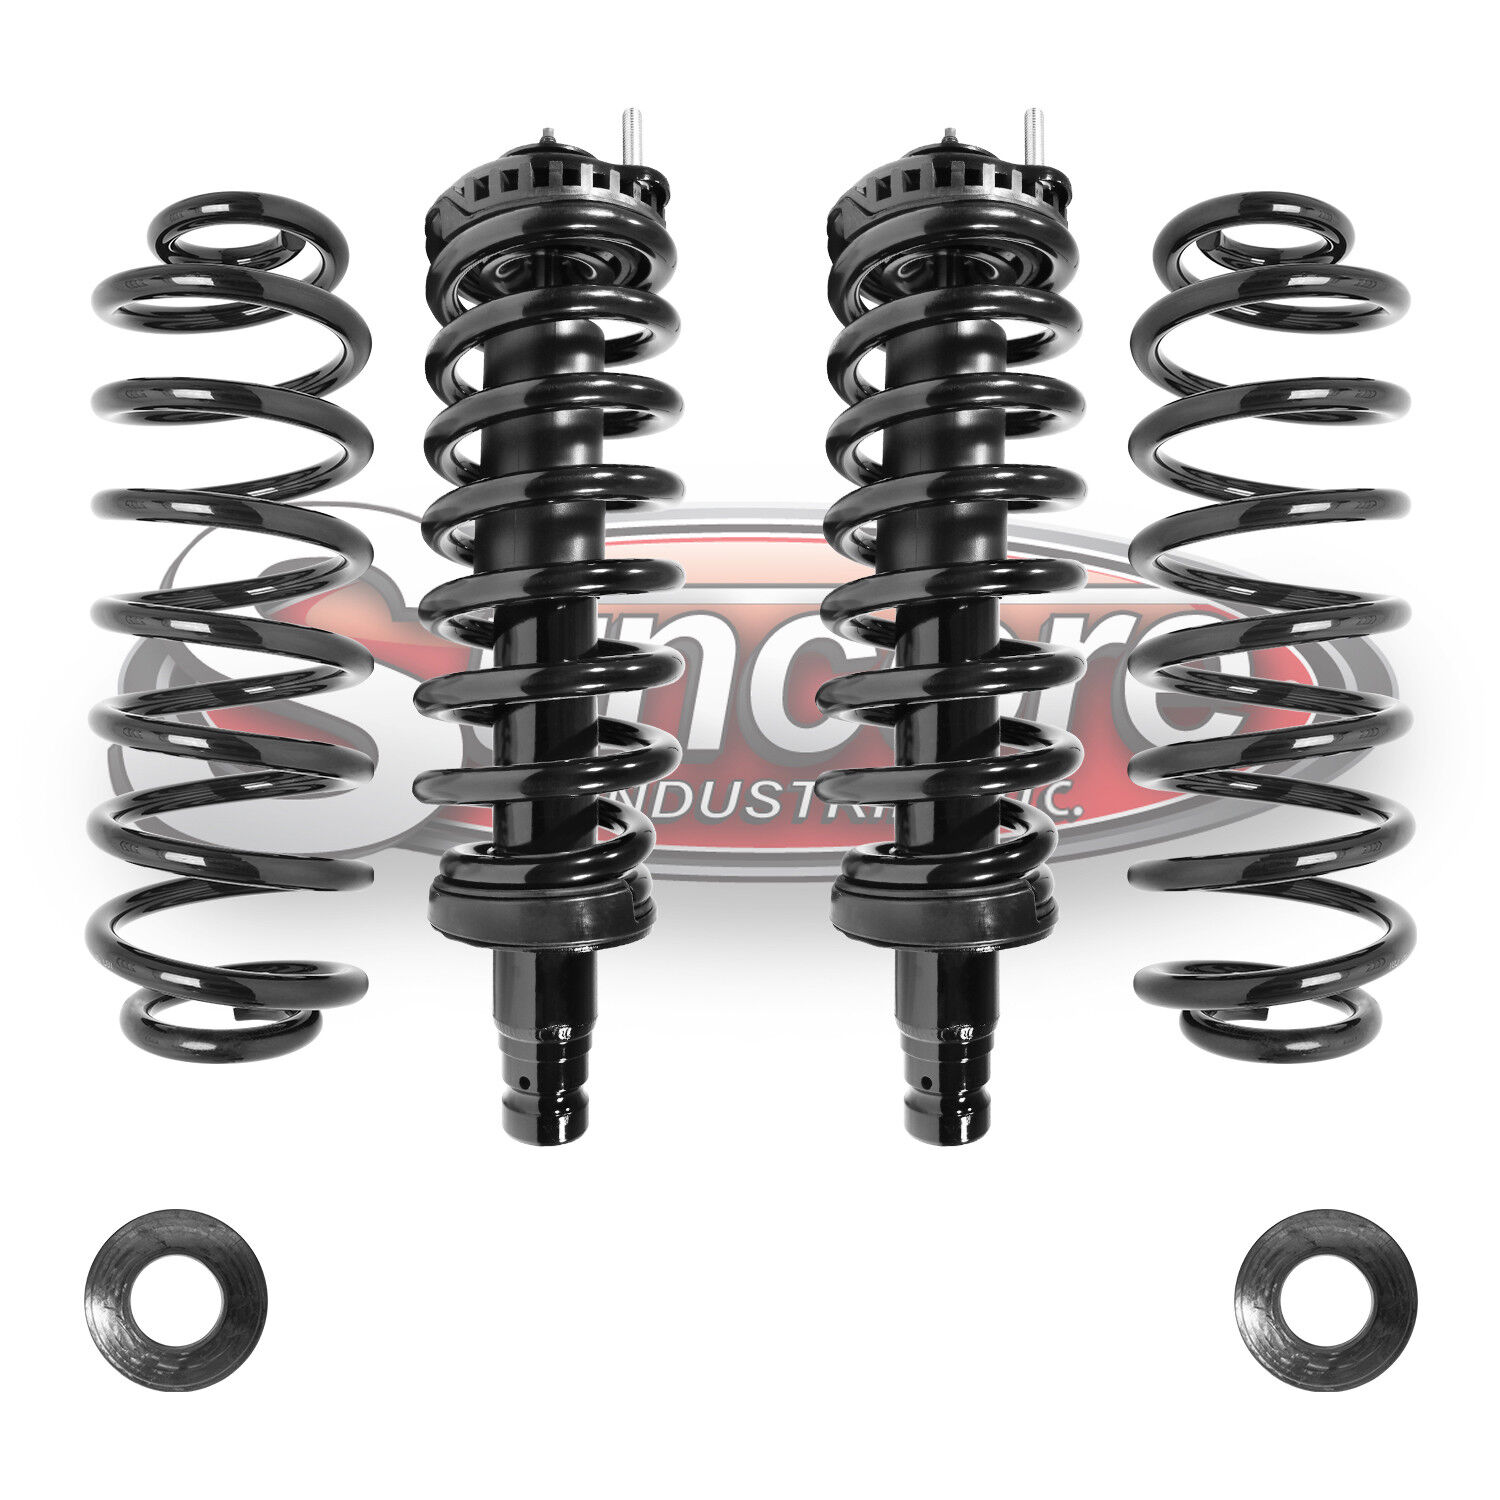 2005-09 Saab 9-7x Suspension Conversion Kit to Coil Springs & Struts